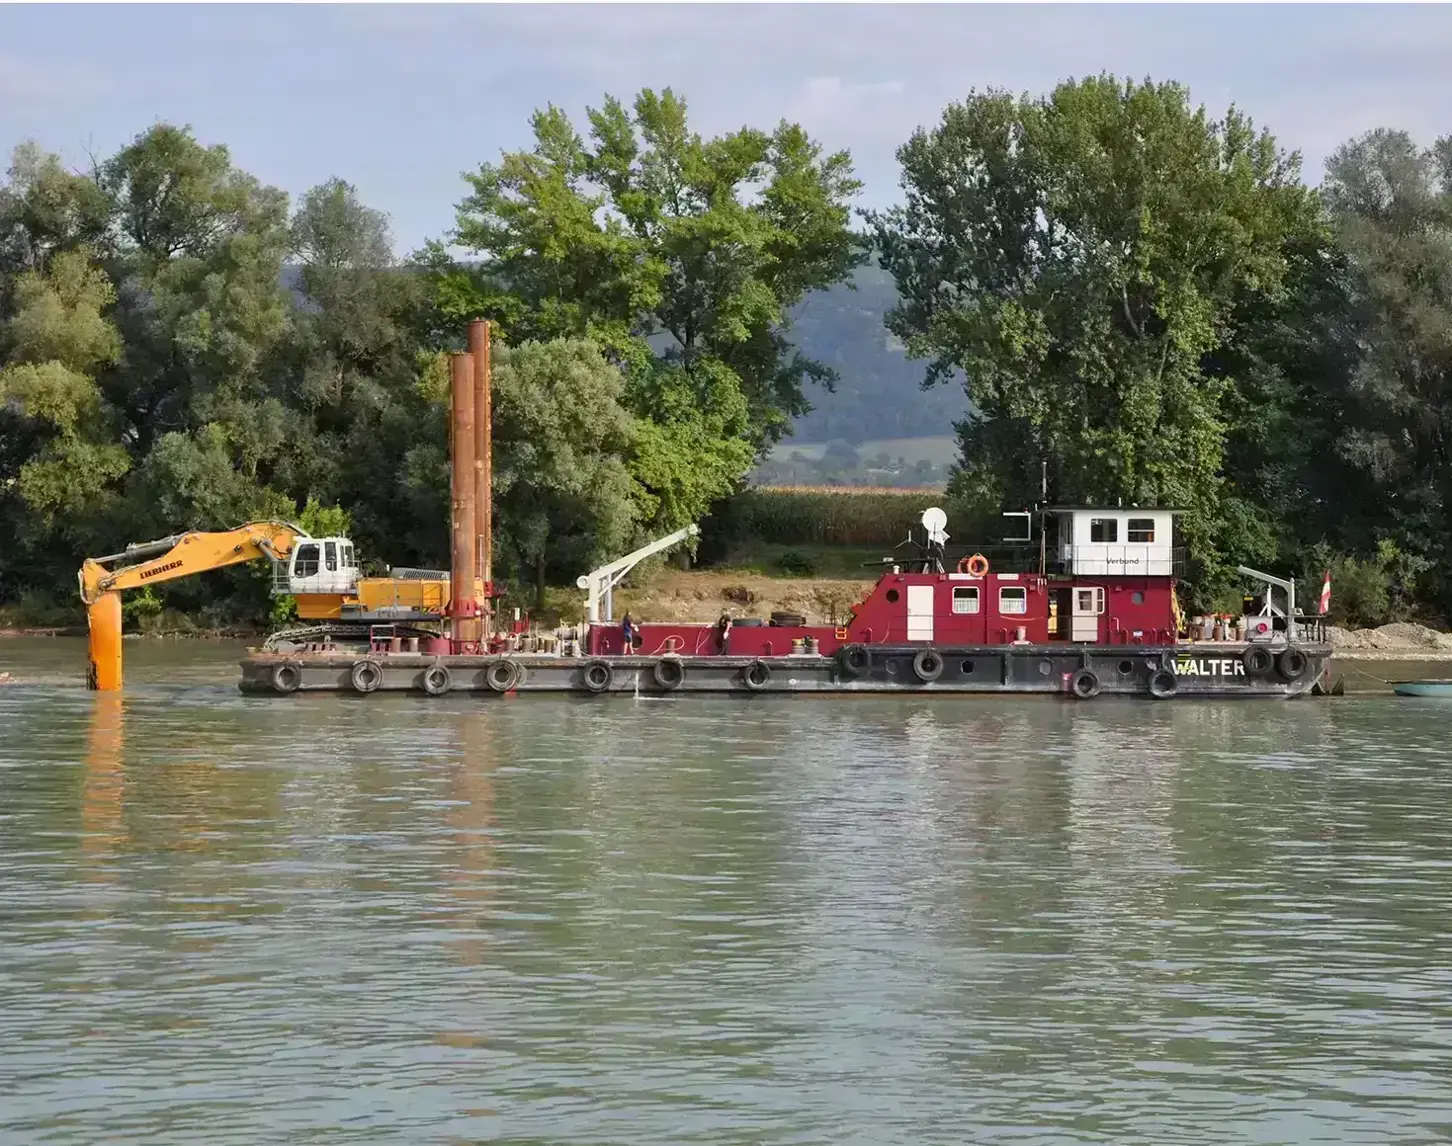 The dredging between Melk and Ybbs has begun. Dredgers stand on large ships and do their work.